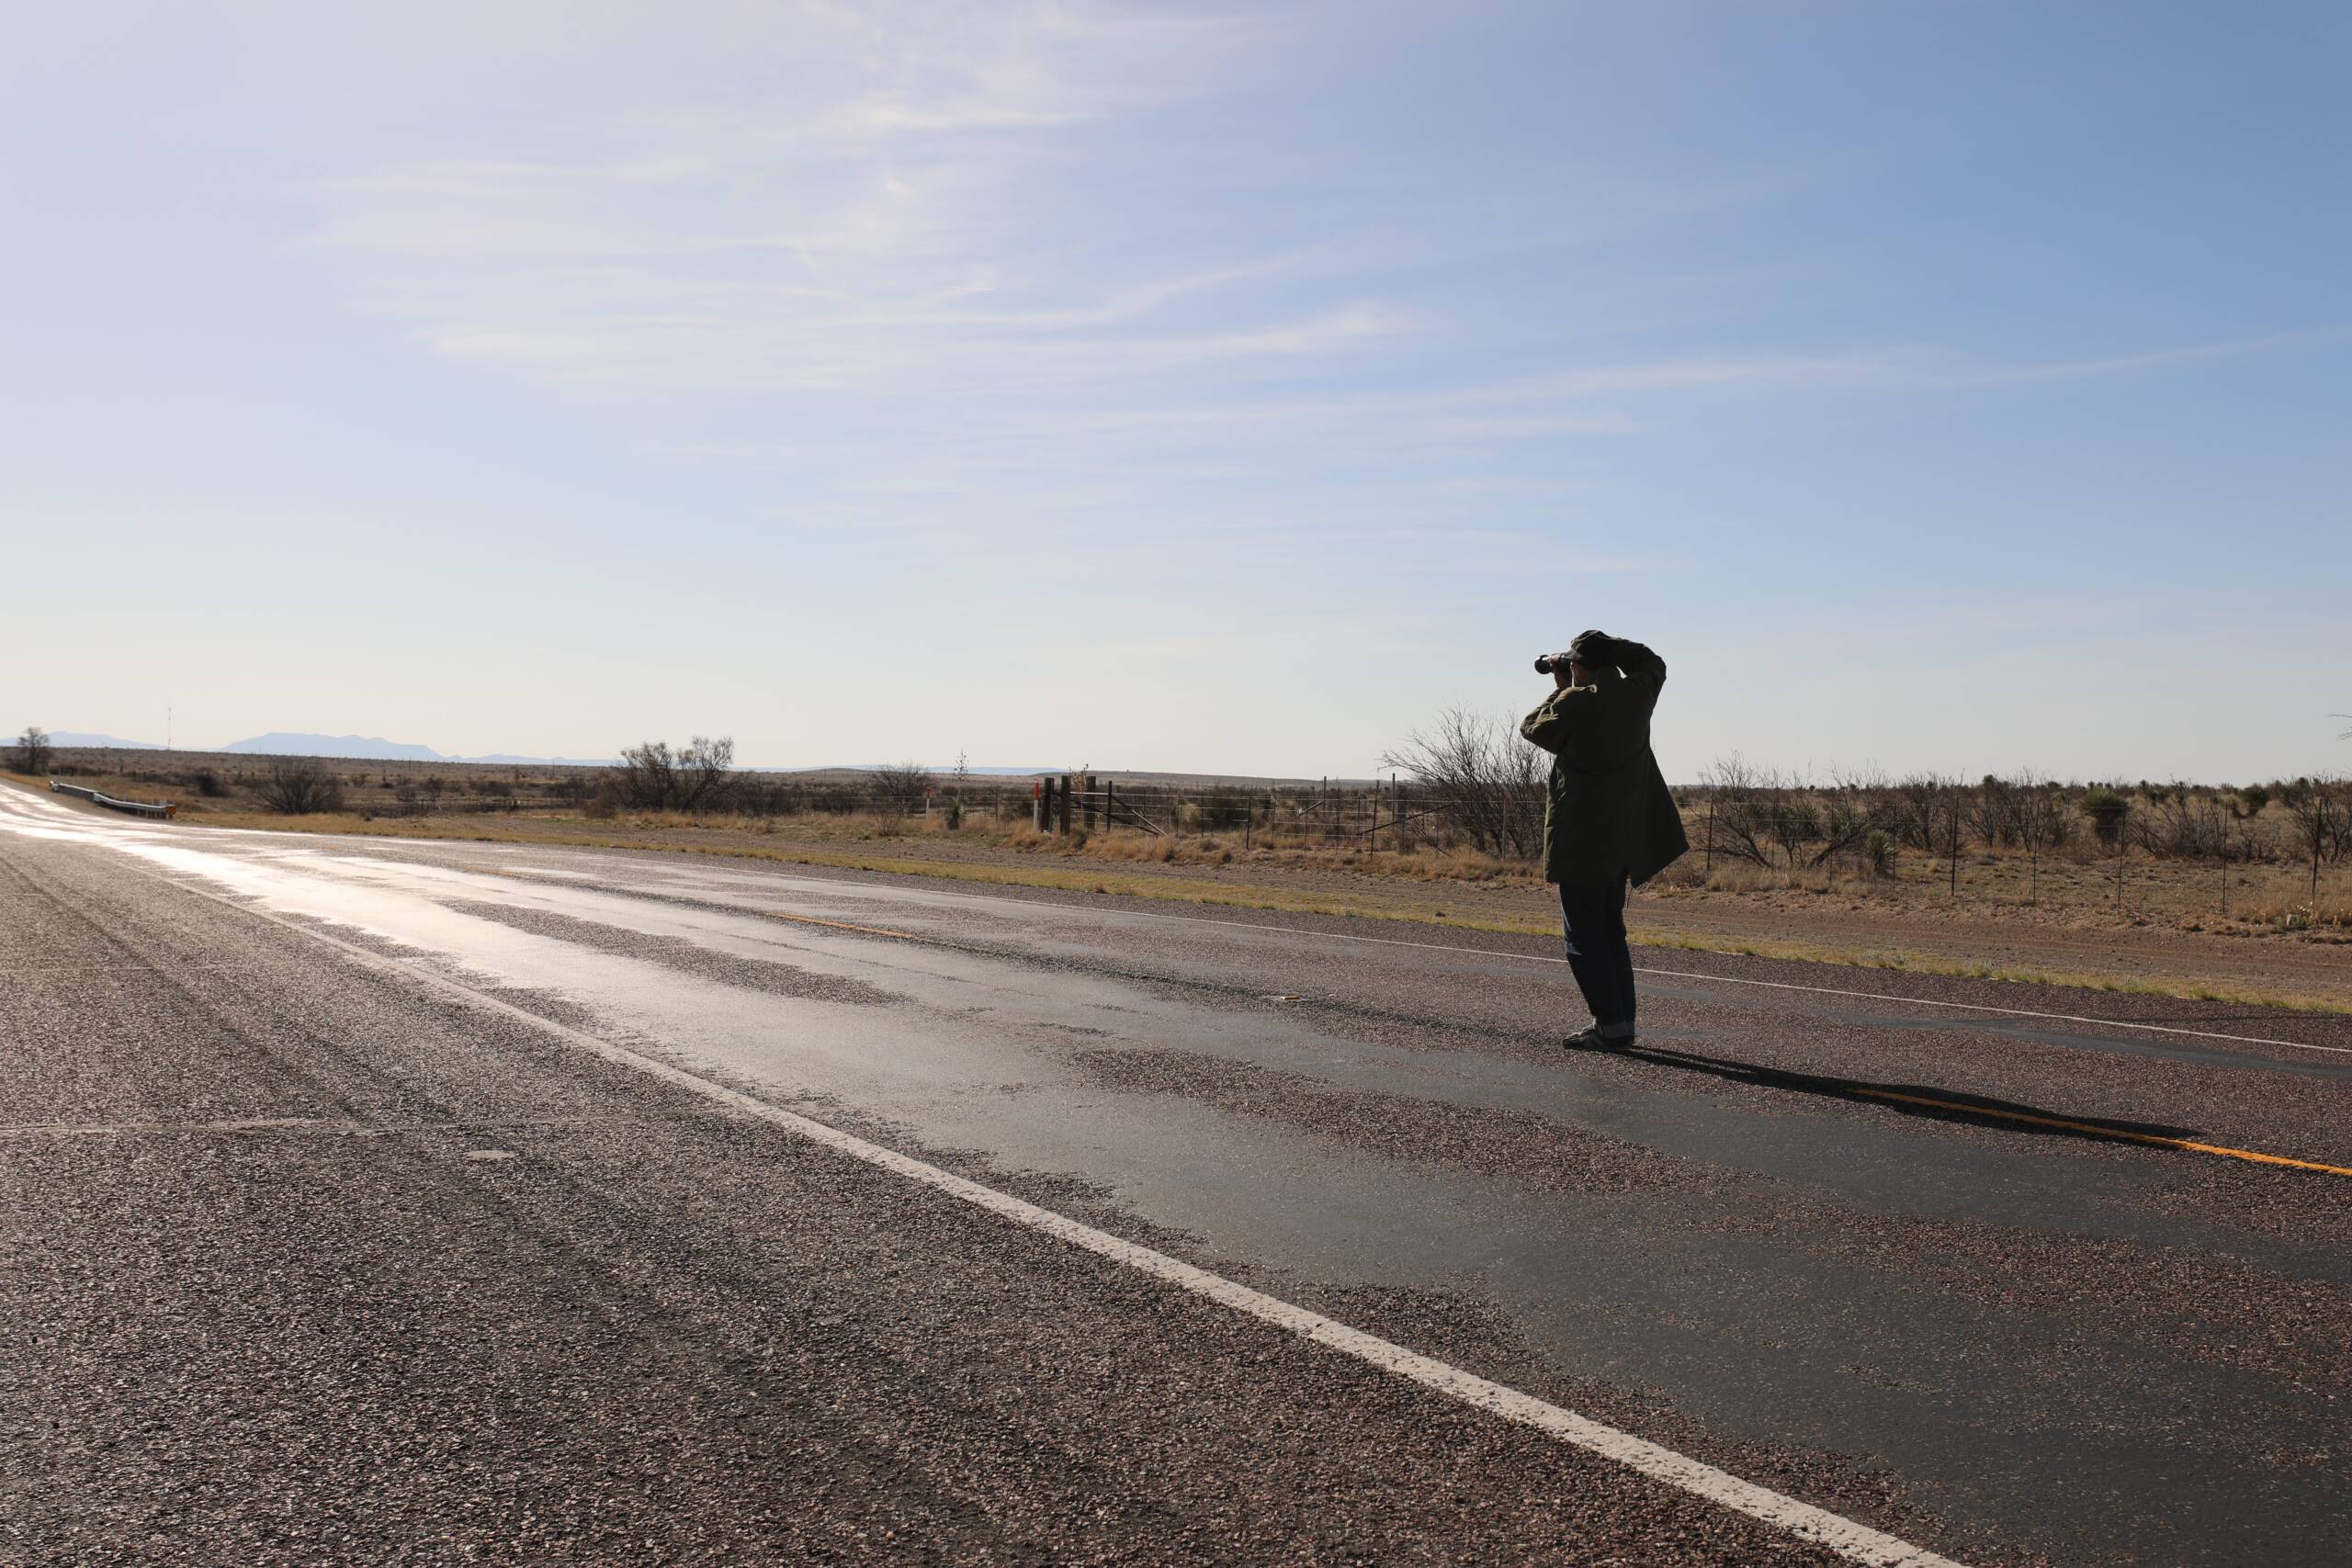 A man with a camera in hand taking a picture of the road ahead